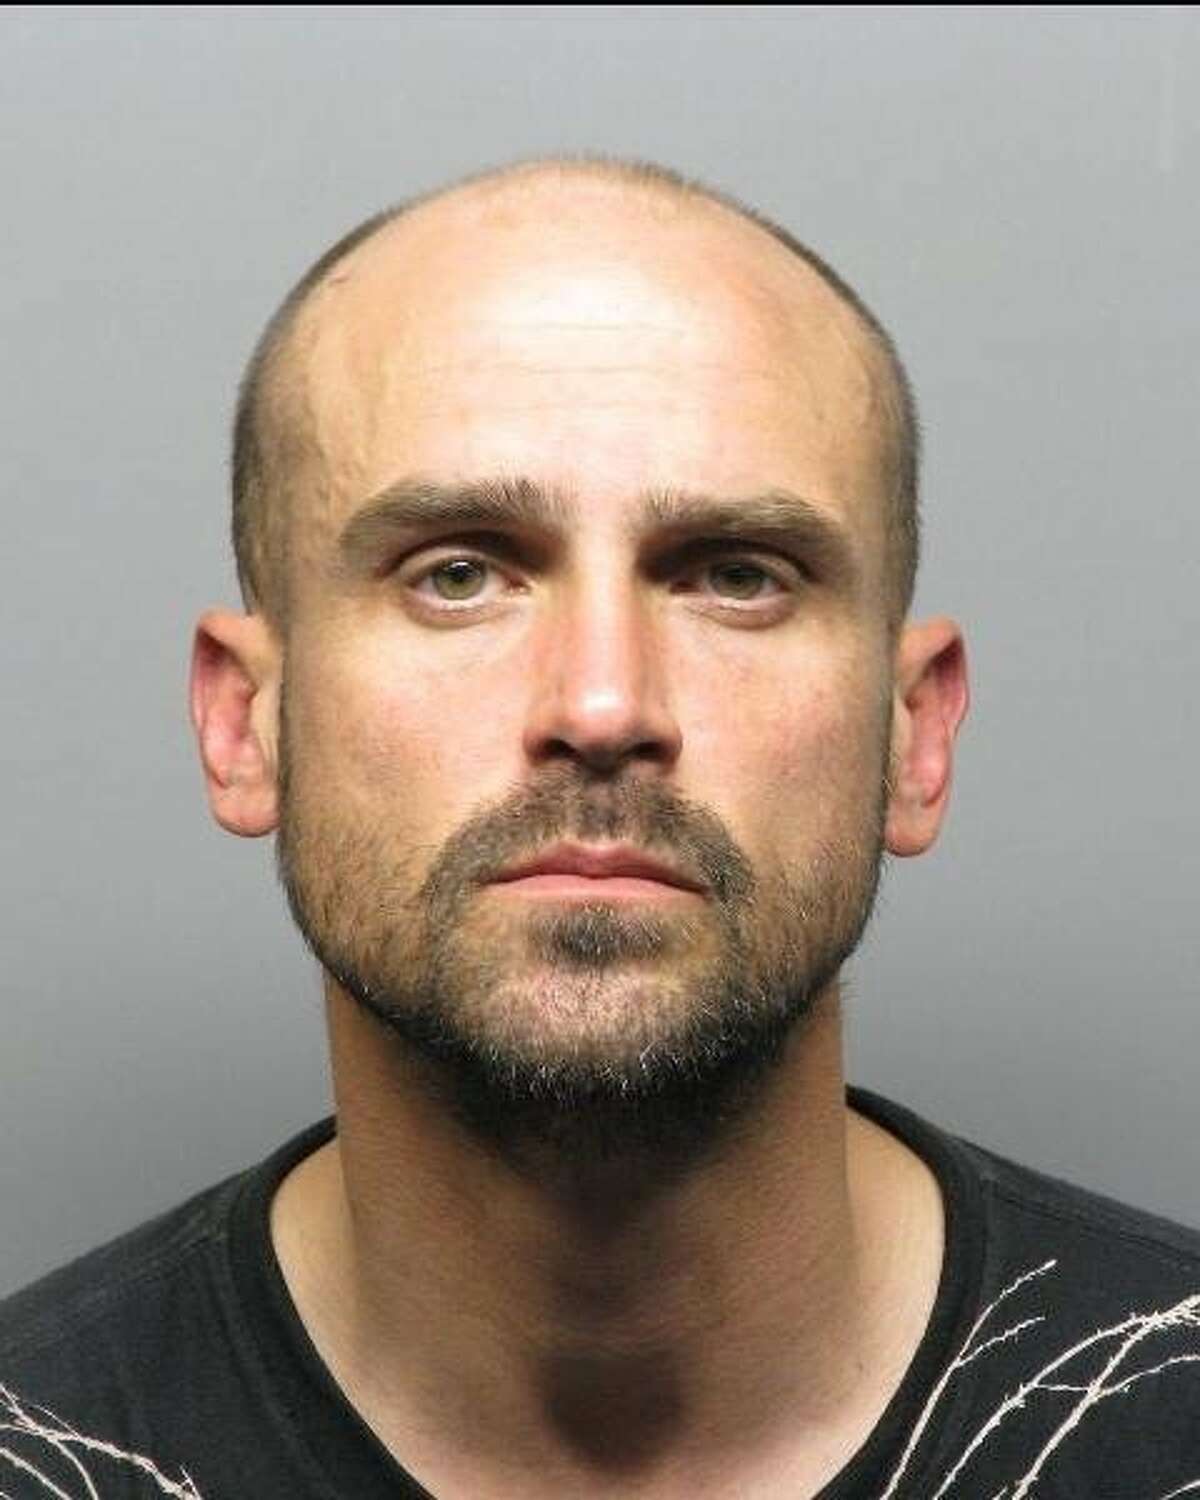 Aaron Goode, 37, is suspected of stabbing a clerk at a 7-Eleven store in Pacheco the morning of Thursday, July 22, 2015.